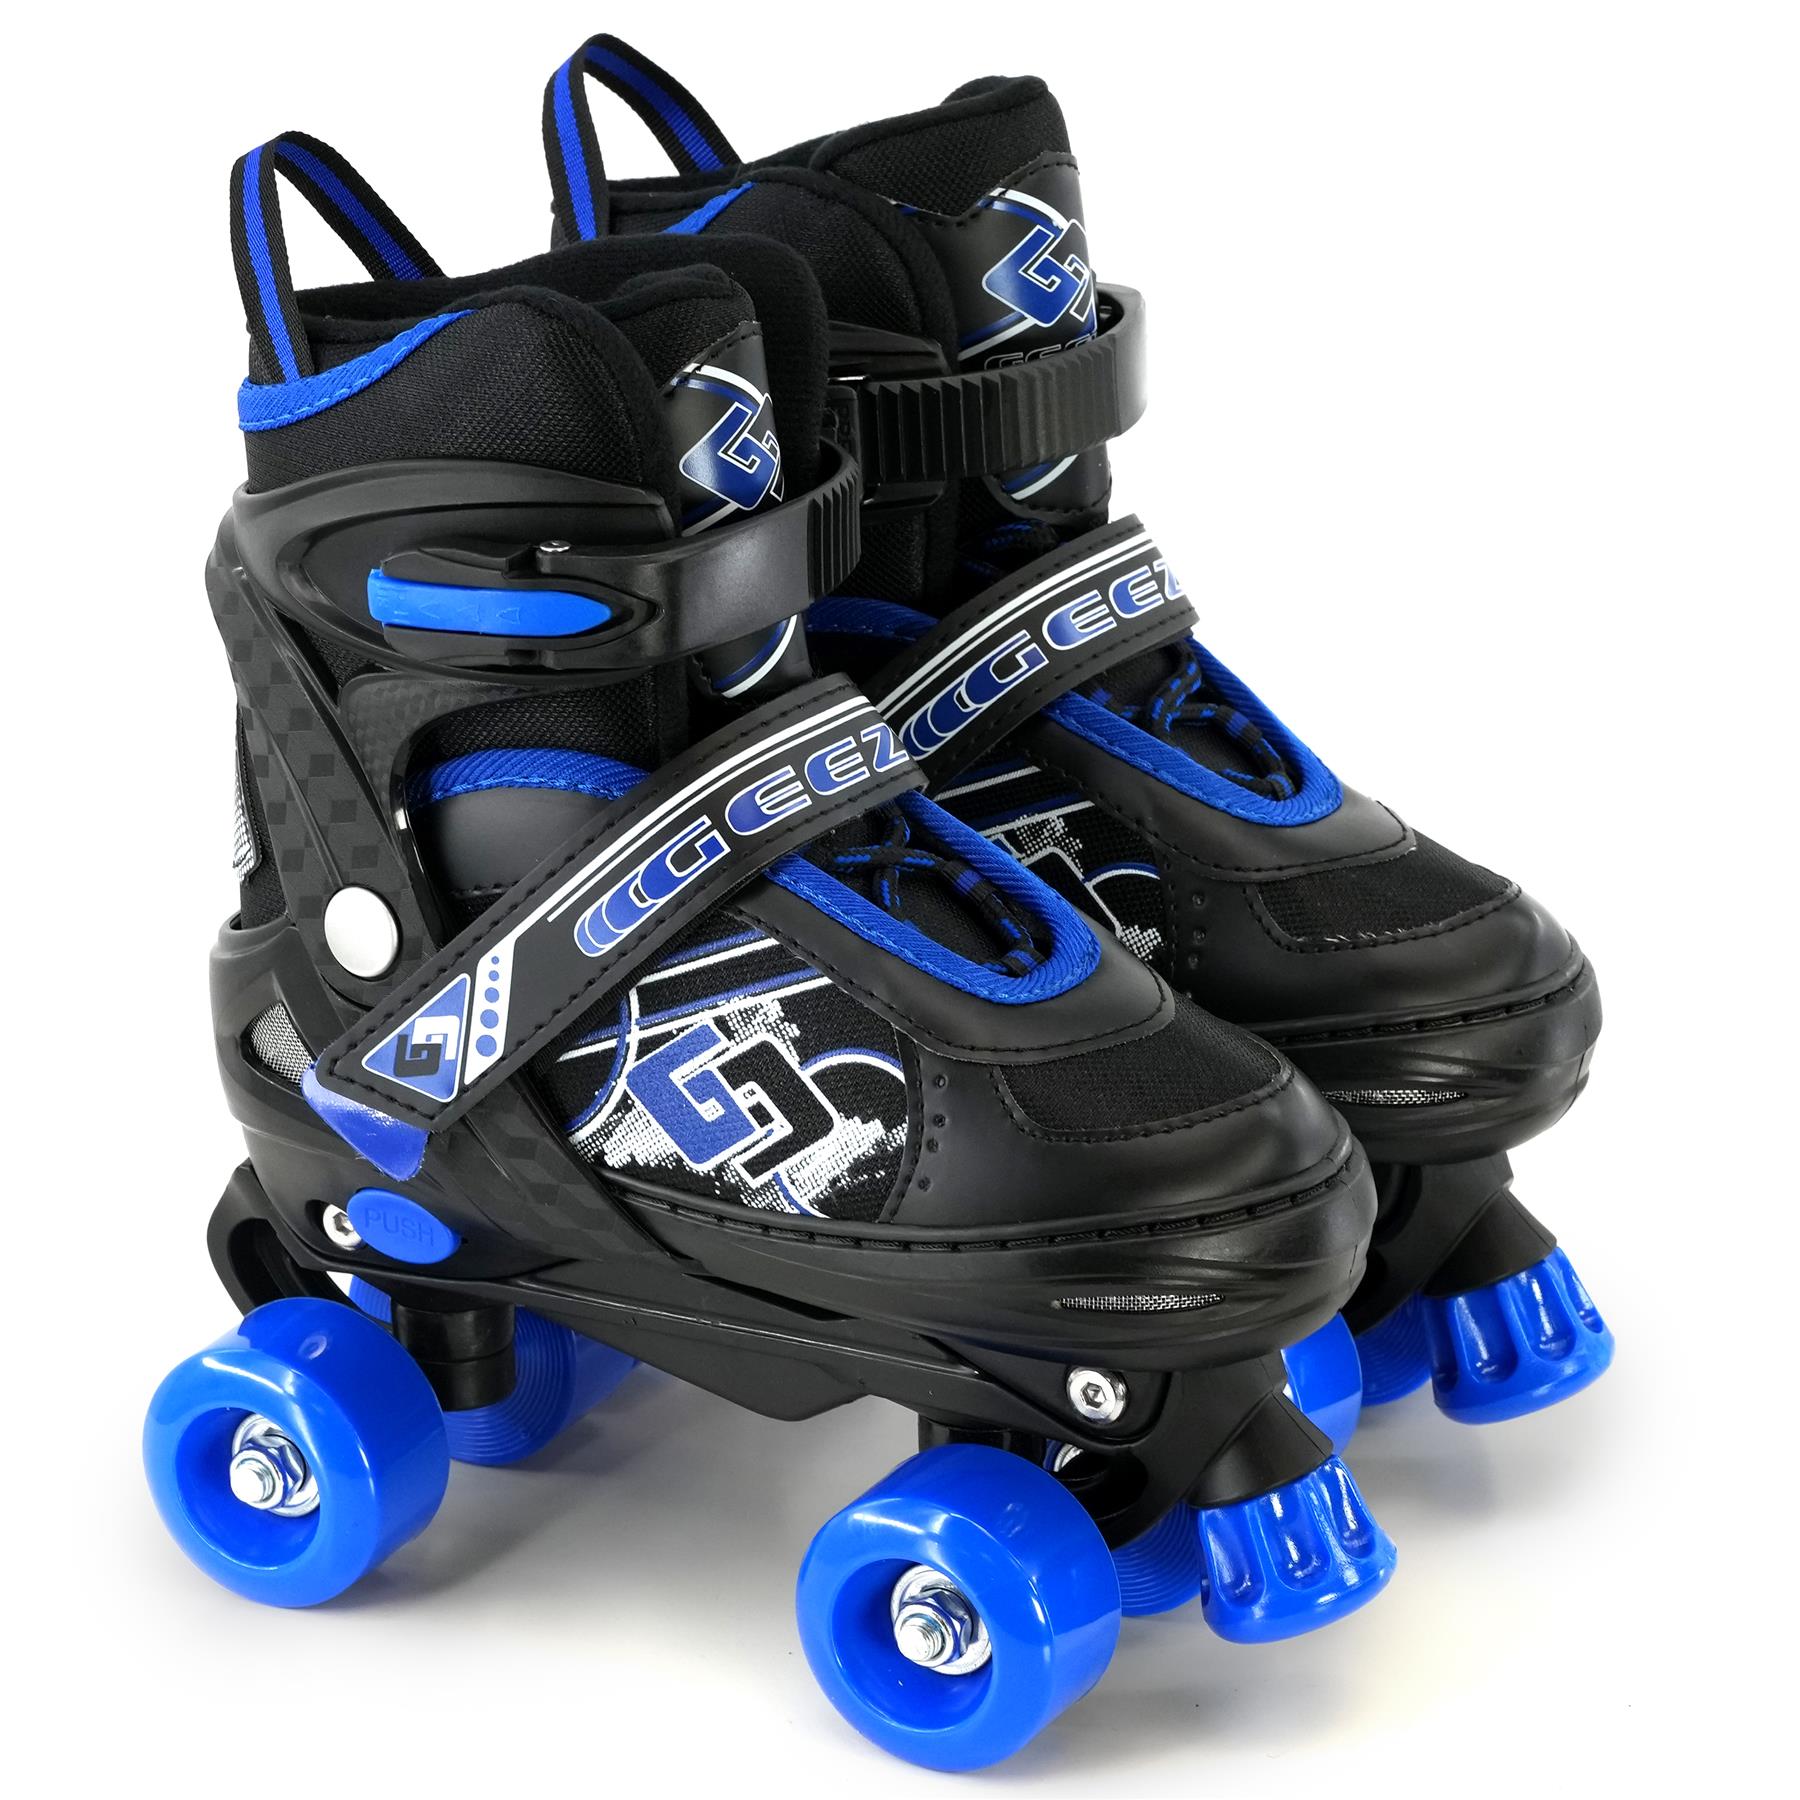 Blue and Black Roller Skates for Kids with 4 Wheel by The Magic Toy Shop - UKBuyZone